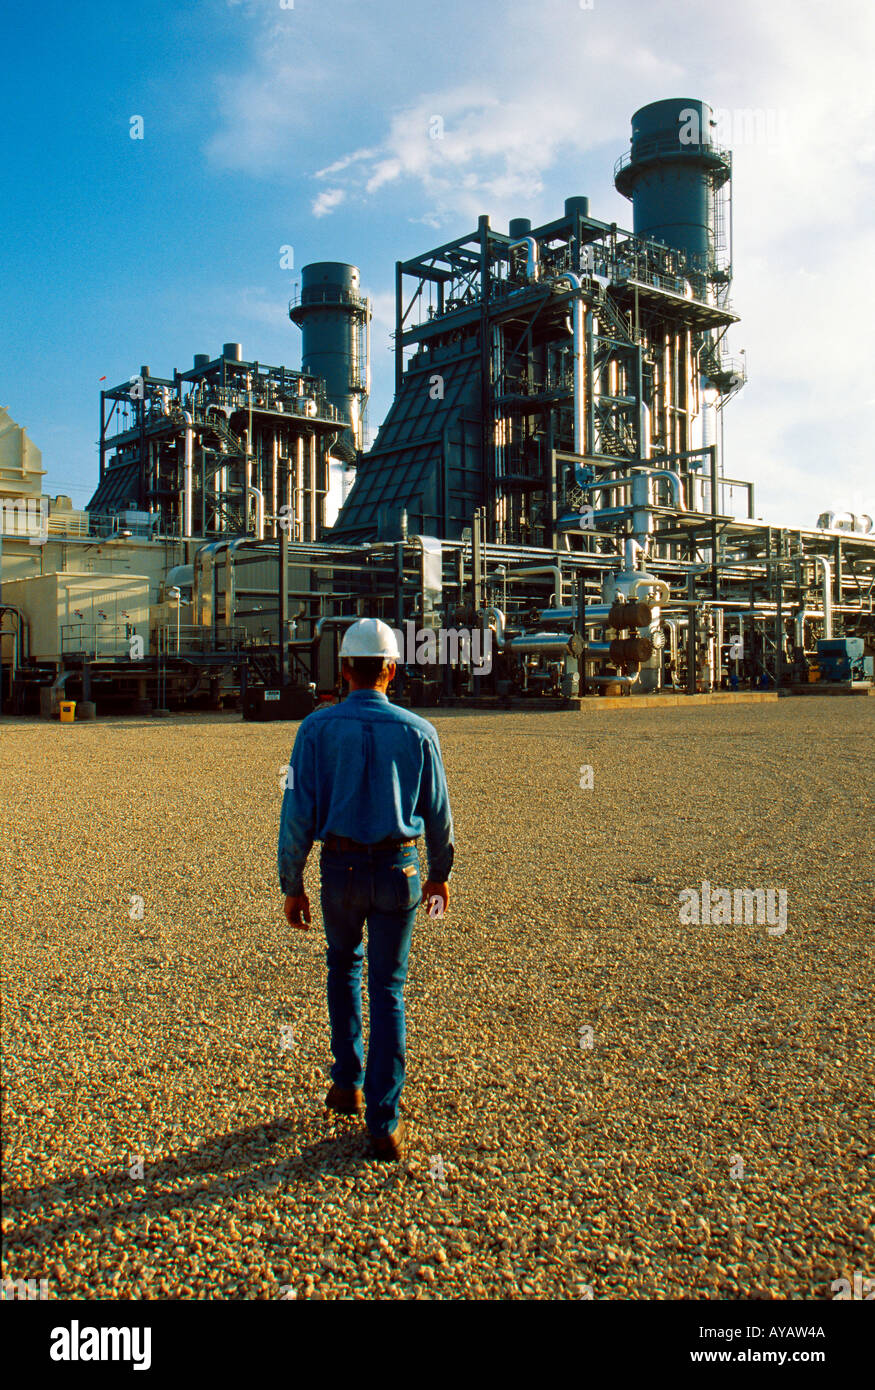 Gas Fired Power Plant Stock Photo